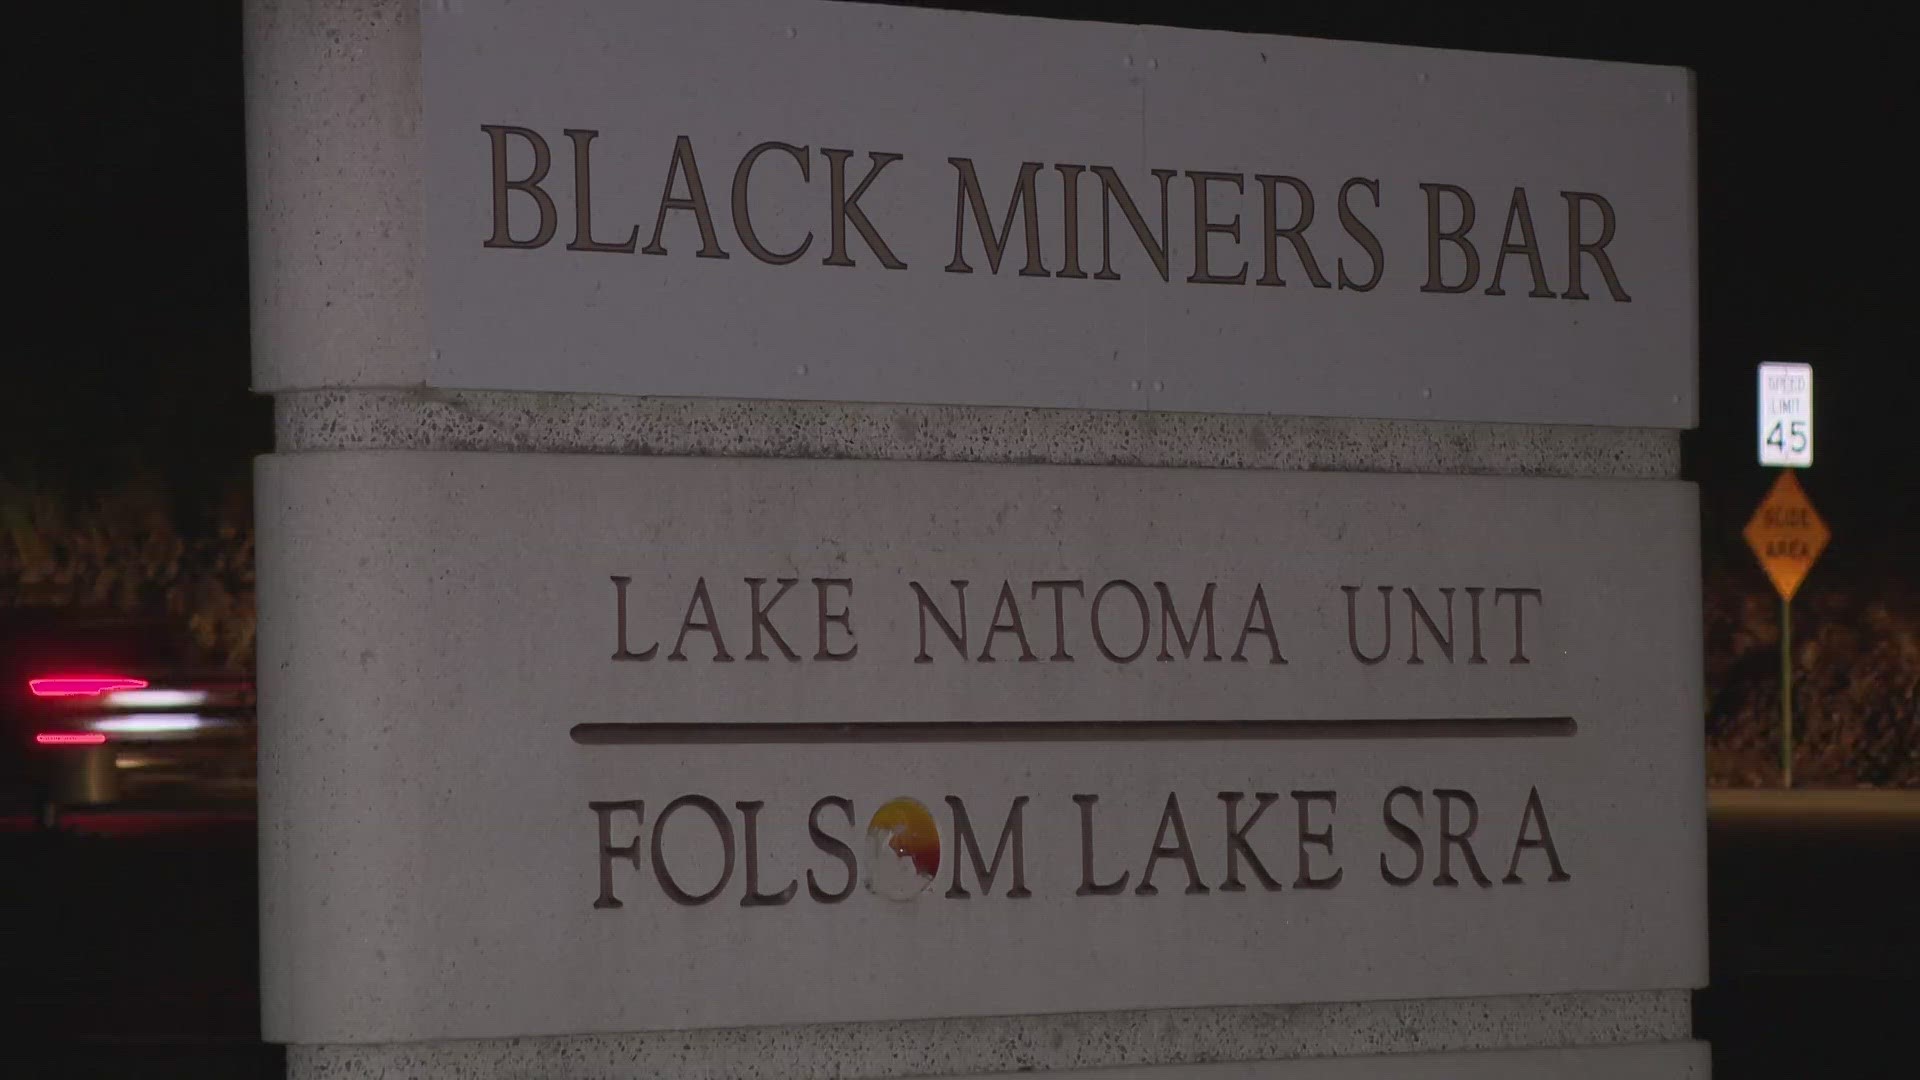 Officials say they got multiple calls around 3:30 p.m. about a body at the bottom of a steep embankment in the area of Black Miners Bar.